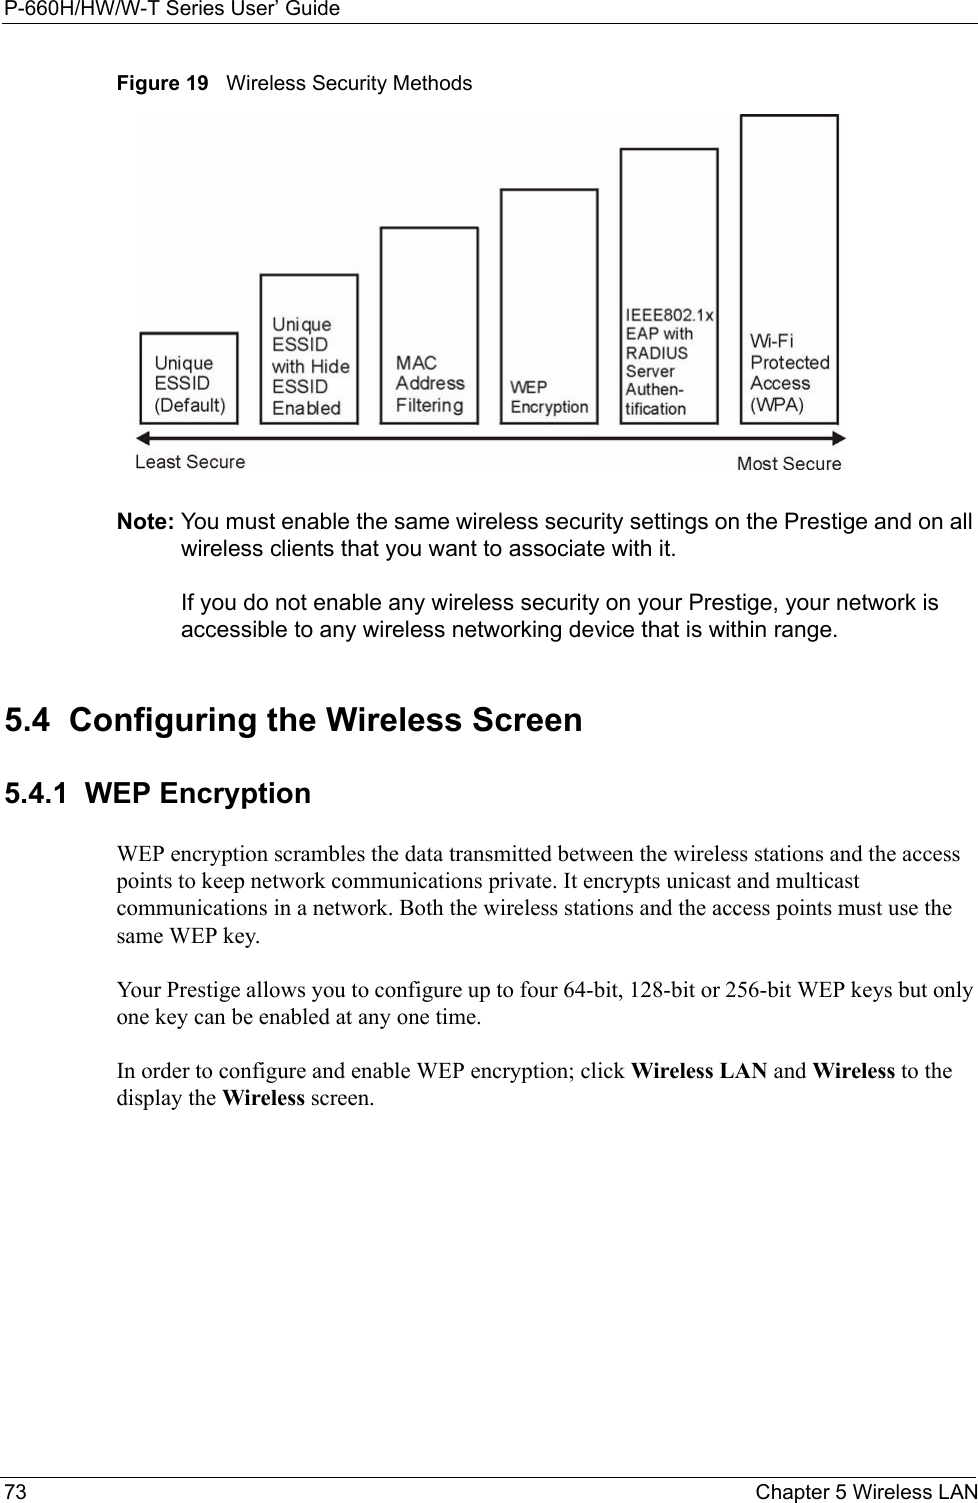 P-660H/HW/W-T Series User’ Guide73 Chapter 5 Wireless LANFigure 19   Wireless Security MethodsNote: You must enable the same wireless security settings on the Prestige and on all wireless clients that you want to associate with it. If you do not enable any wireless security on your Prestige, your network is accessible to any wireless networking device that is within range. 5.4  Configuring the Wireless Screen 5.4.1  WEP EncryptionWEP encryption scrambles the data transmitted between the wireless stations and the access points to keep network communications private. It encrypts unicast and multicast communications in a network. Both the wireless stations and the access points must use the same WEP key. Your Prestige allows you to configure up to four 64-bit, 128-bit or 256-bit WEP keys but only one key can be enabled at any one time. In order to configure and enable WEP encryption; click Wireless LAN and Wireless to the display the Wireless screen.